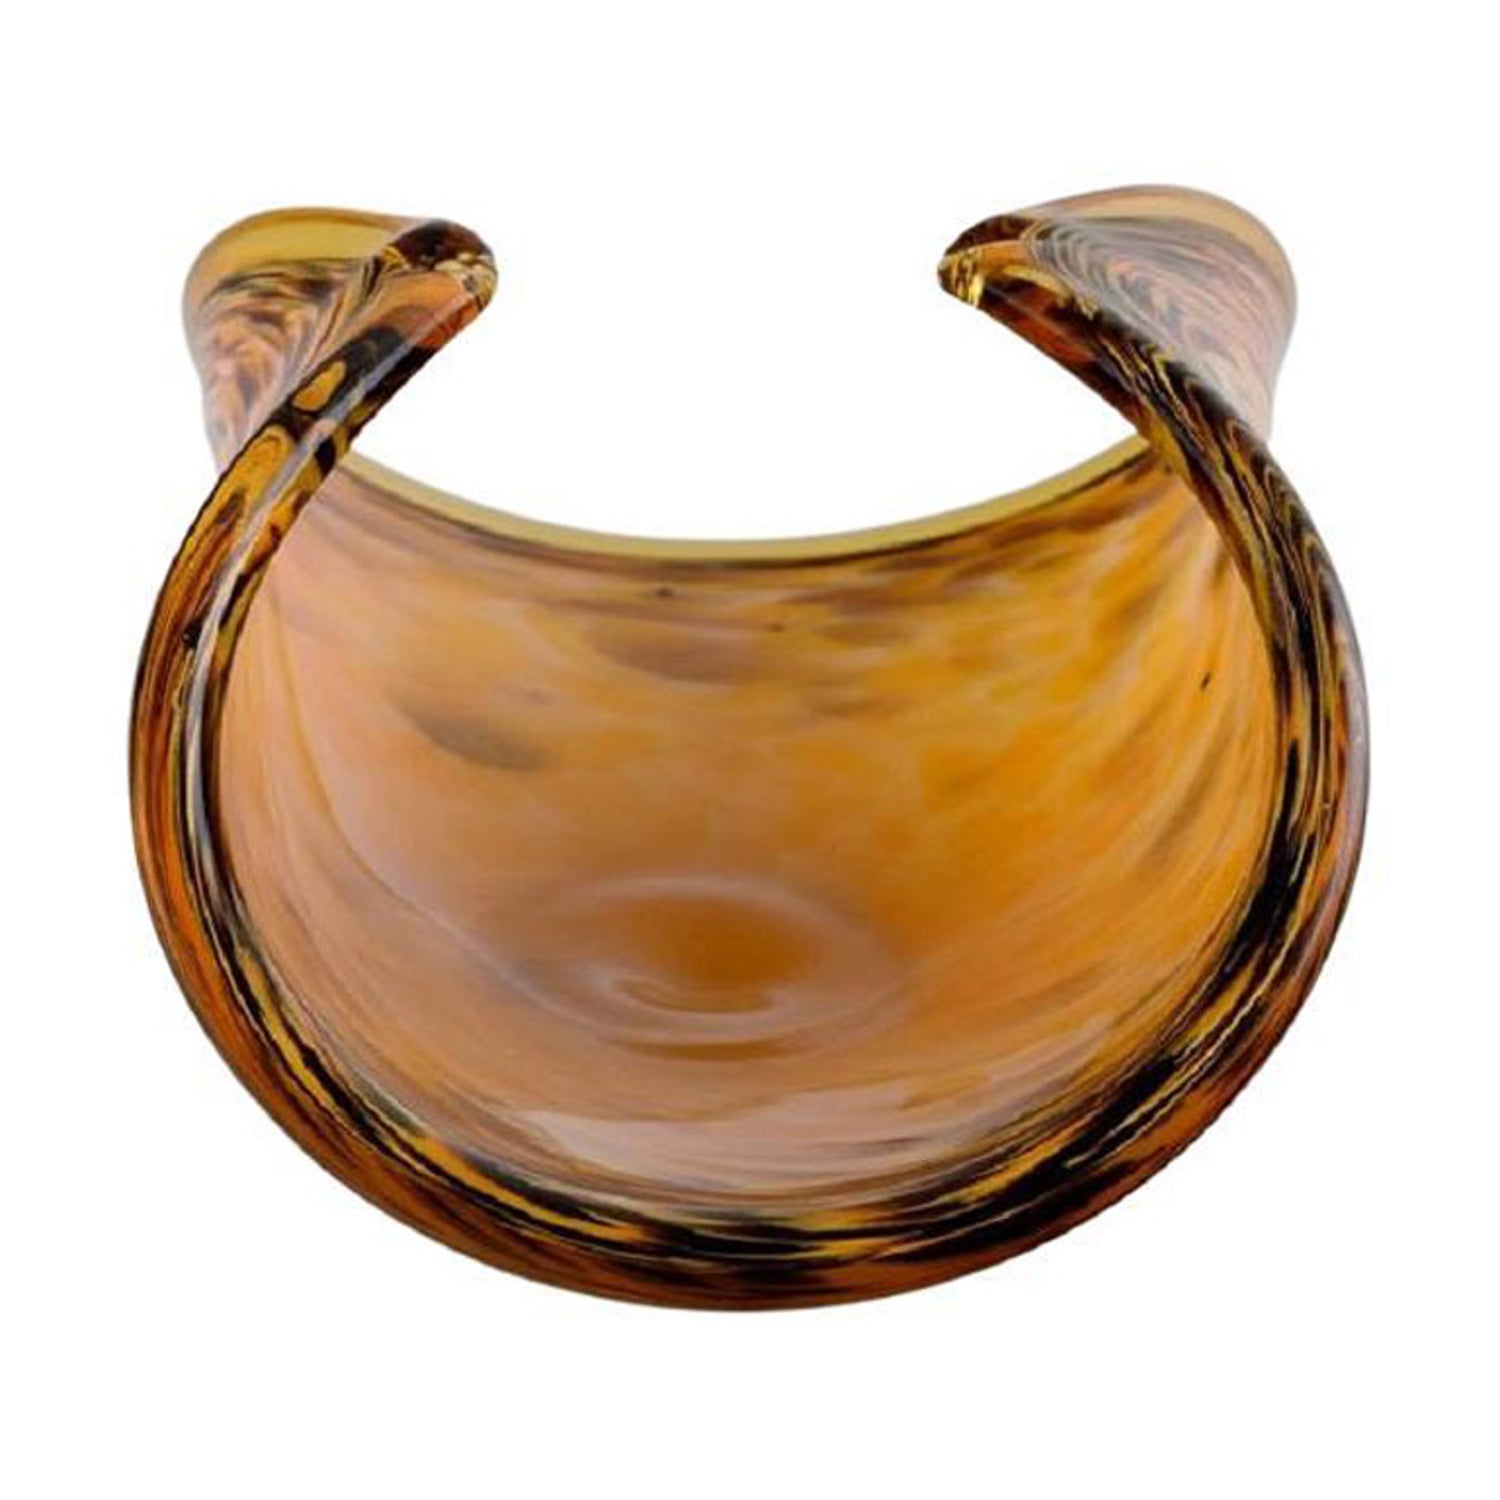 Large Murano Bowl in Polychrome Mouth-Blown Art Glass, 1960s / 70s at  1stDibs